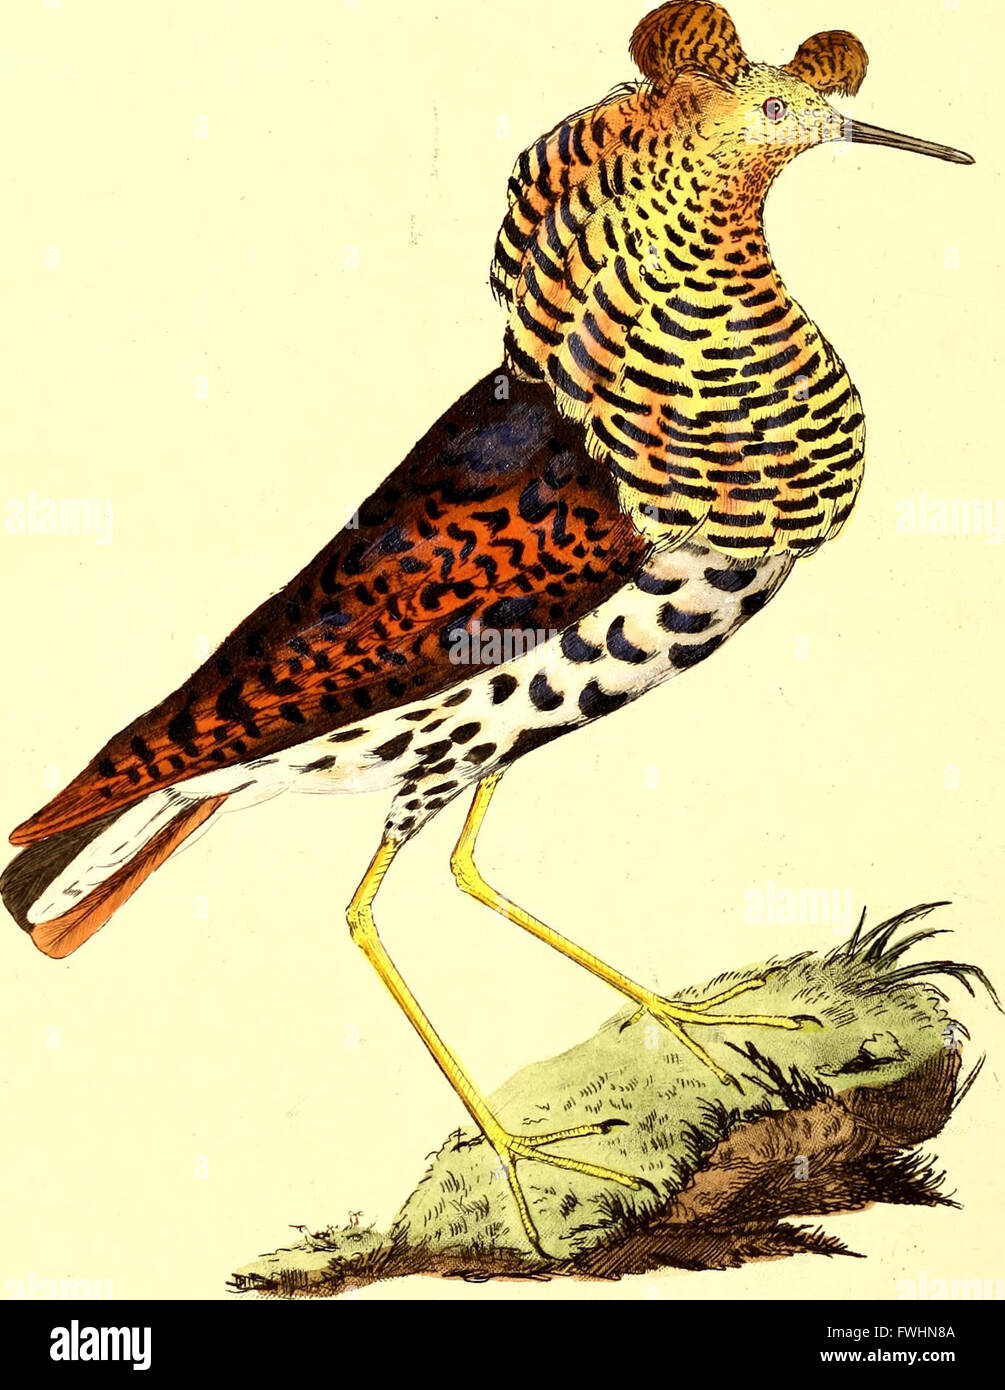 The natural history of British birds, or, A selection of the most rare, beautiful and interesting birds which inhabit this country - the descriptions from the Systema naturae of Linnaeus - with Stock Photo